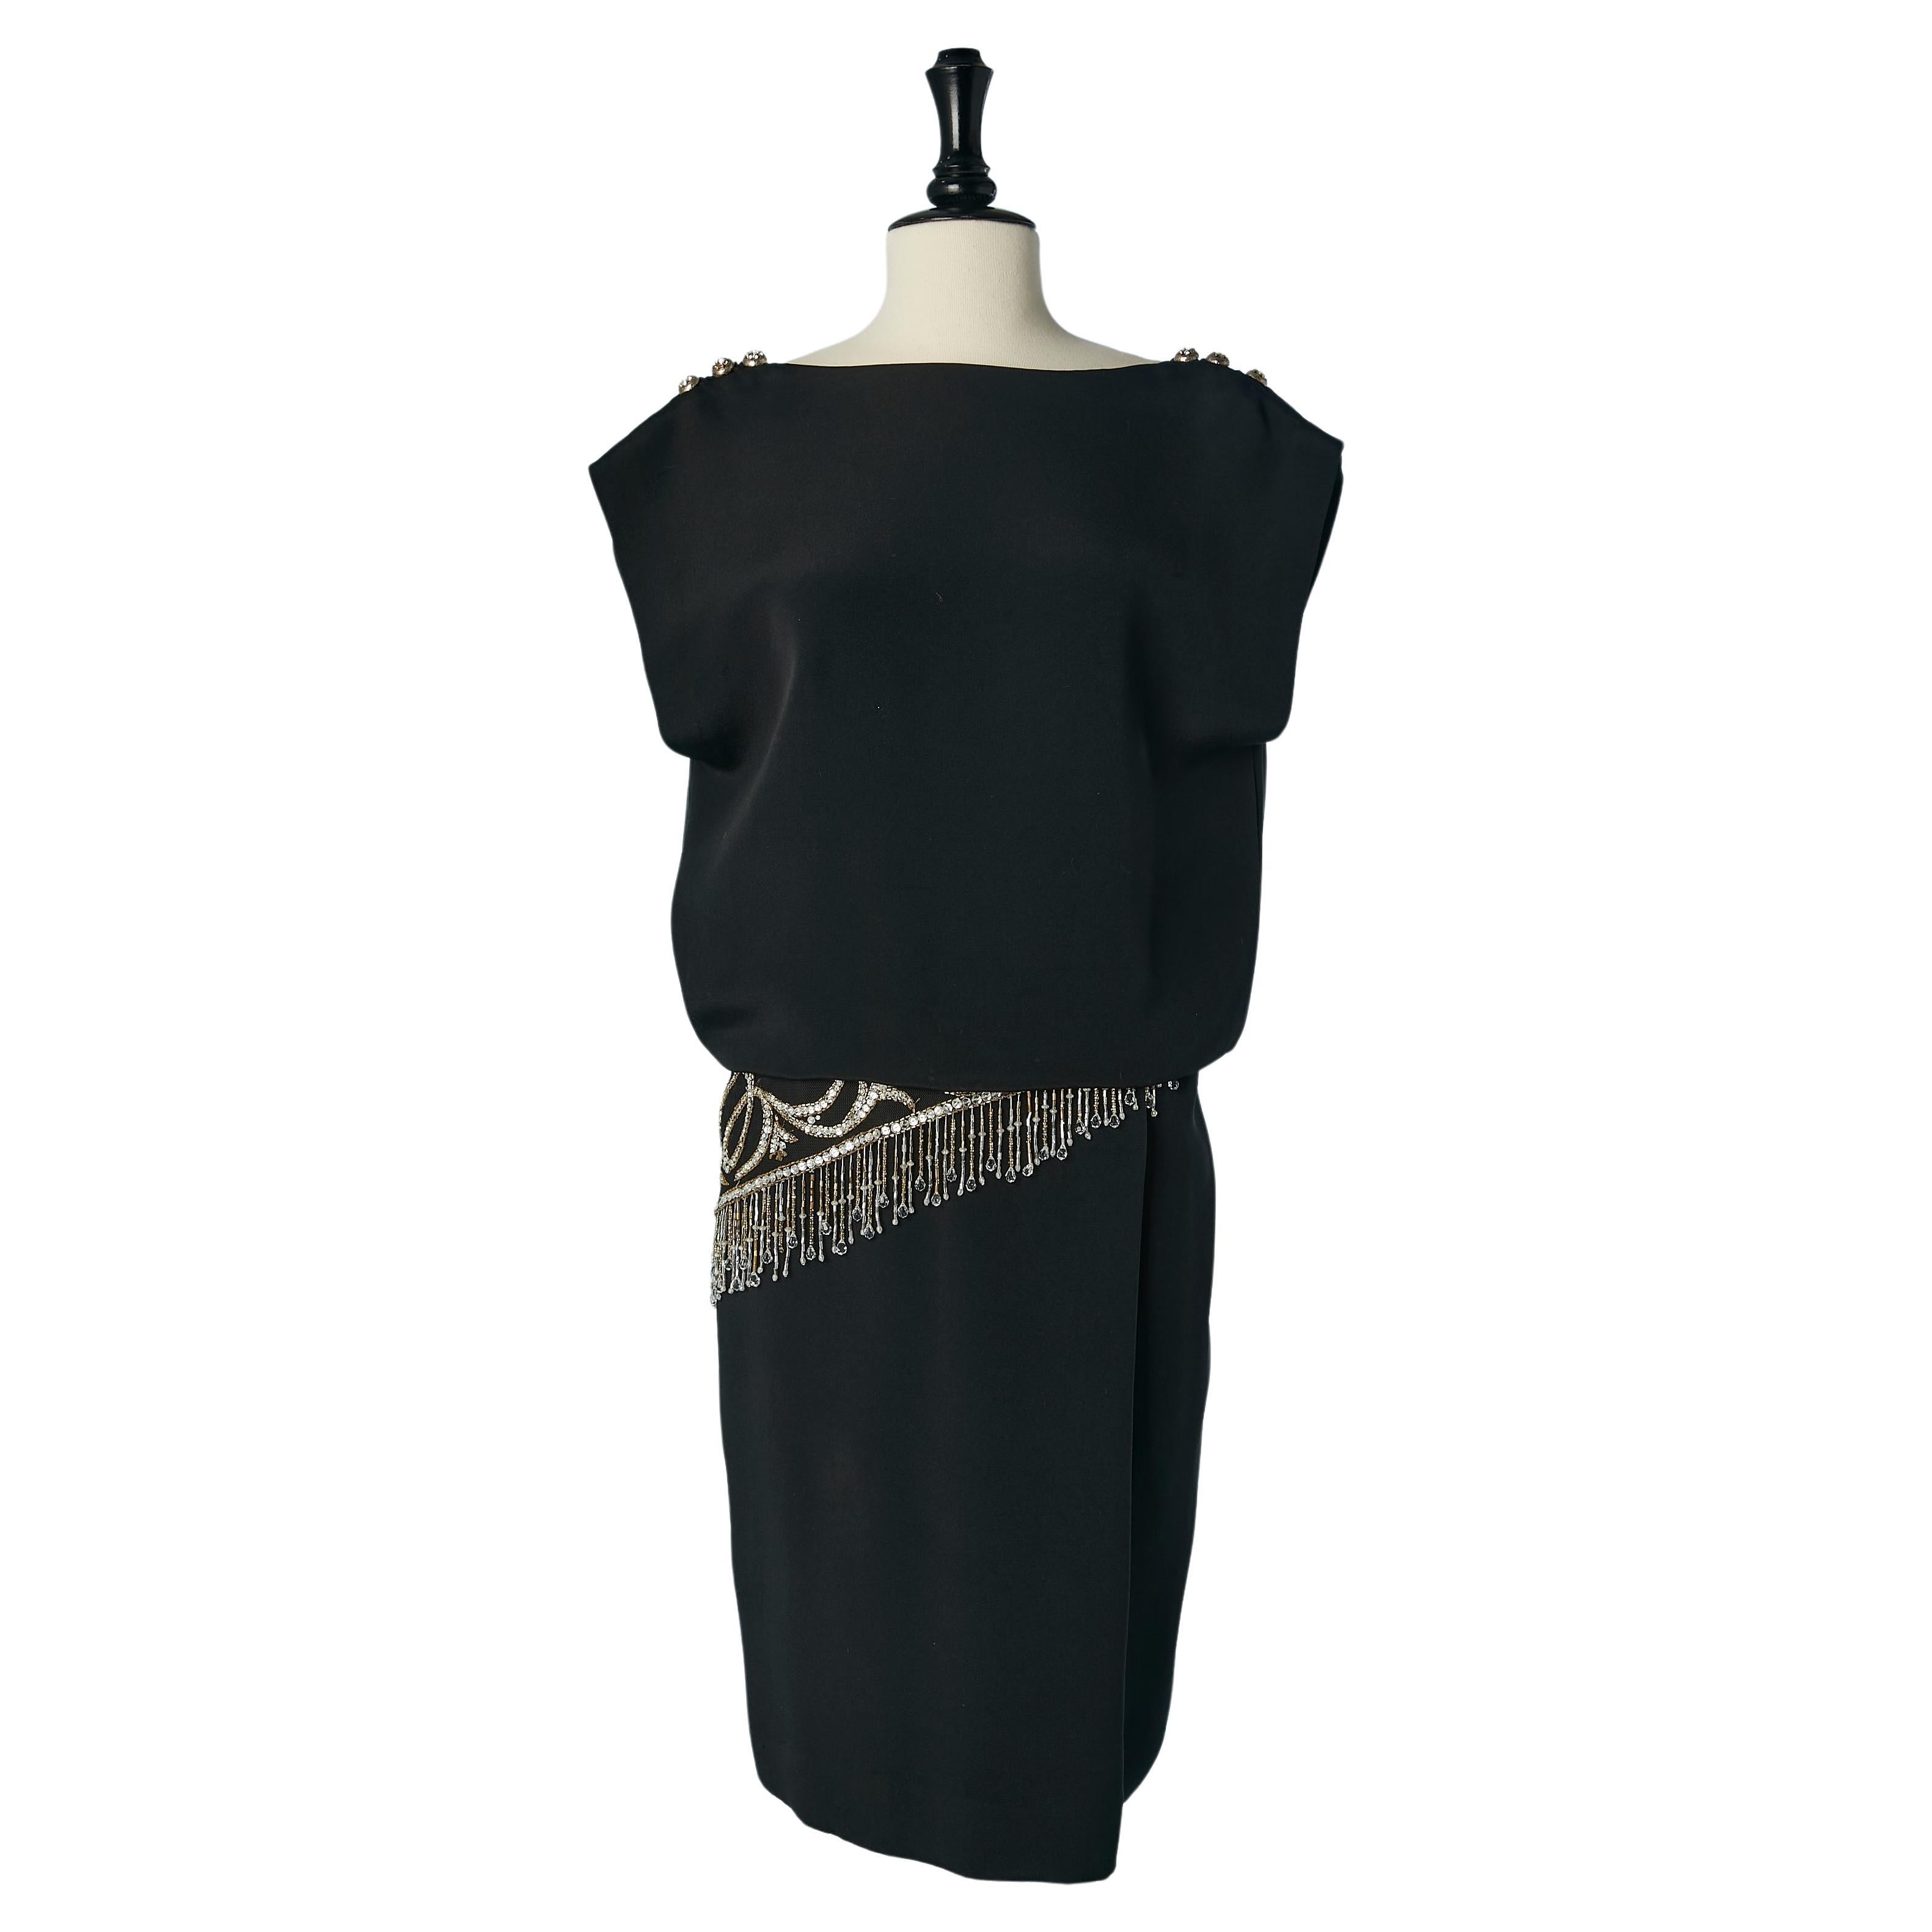 Black  cocktail dress with rhinestone and beads Bob Mackie for Nieman Marcus For Sale